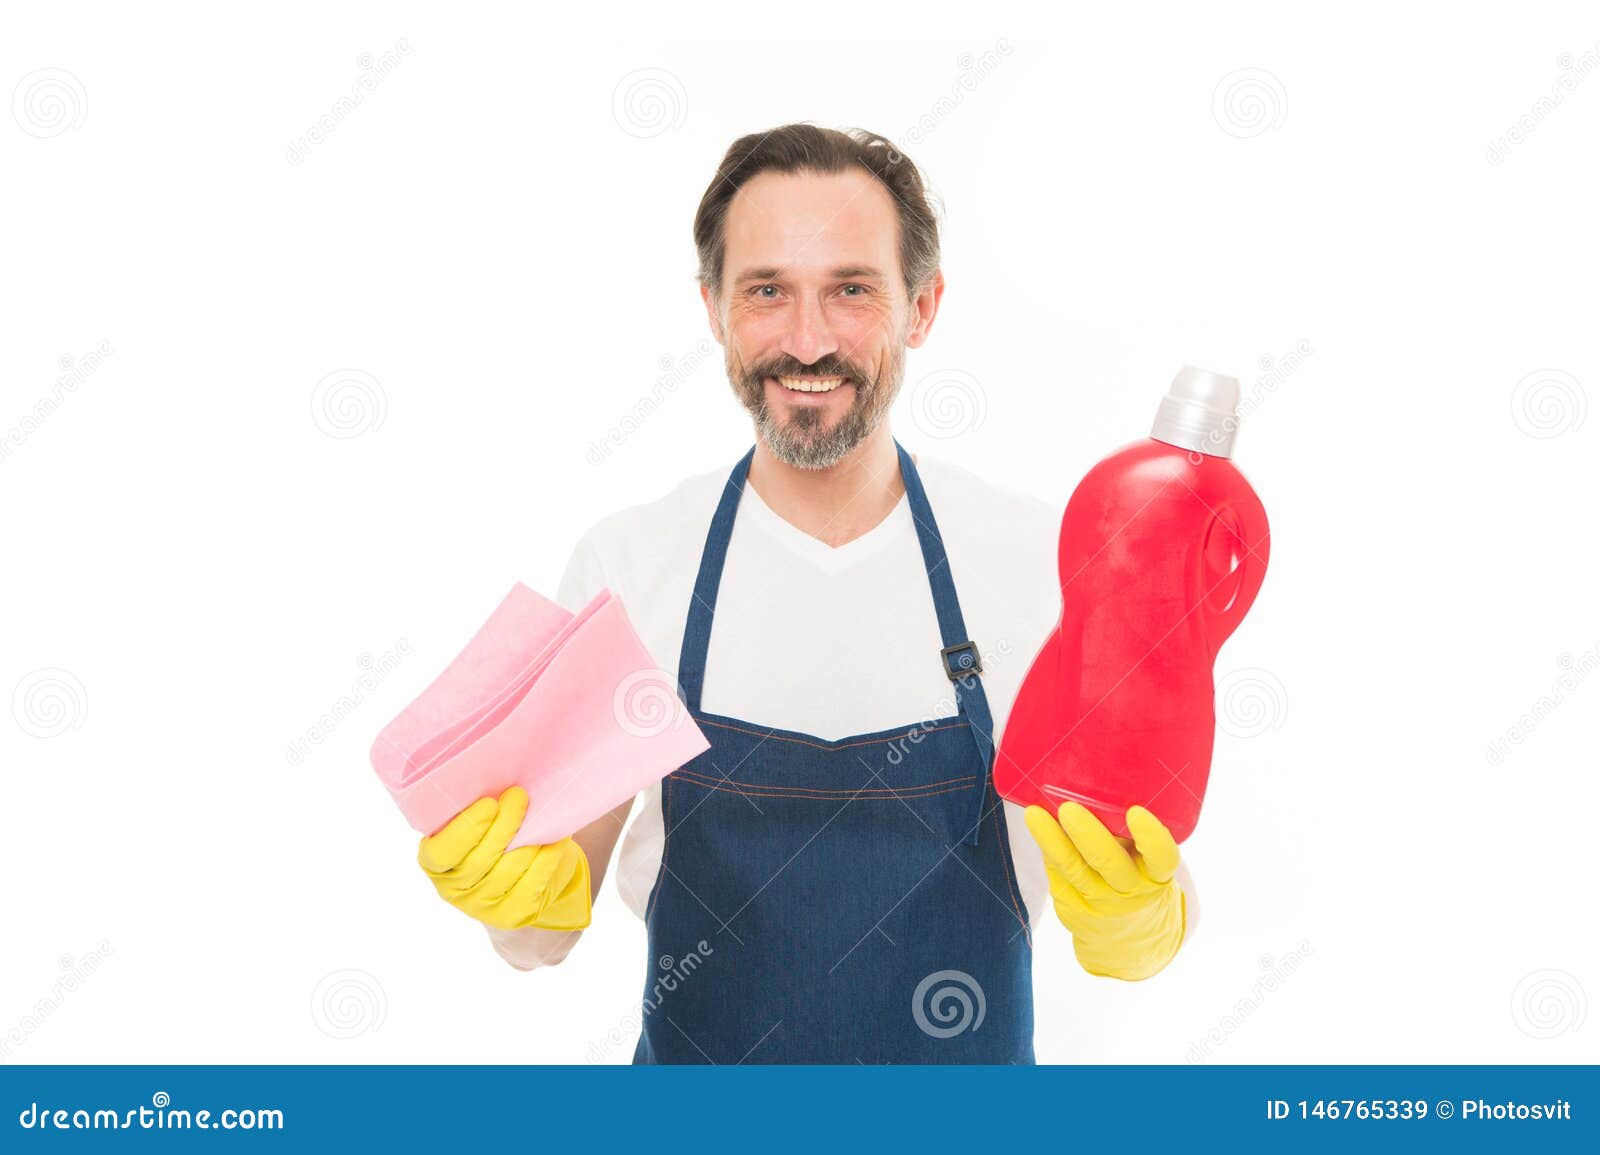 cleanness is in his hands. mature household helper. mature household worker holding laundry detergent in rubber gloves